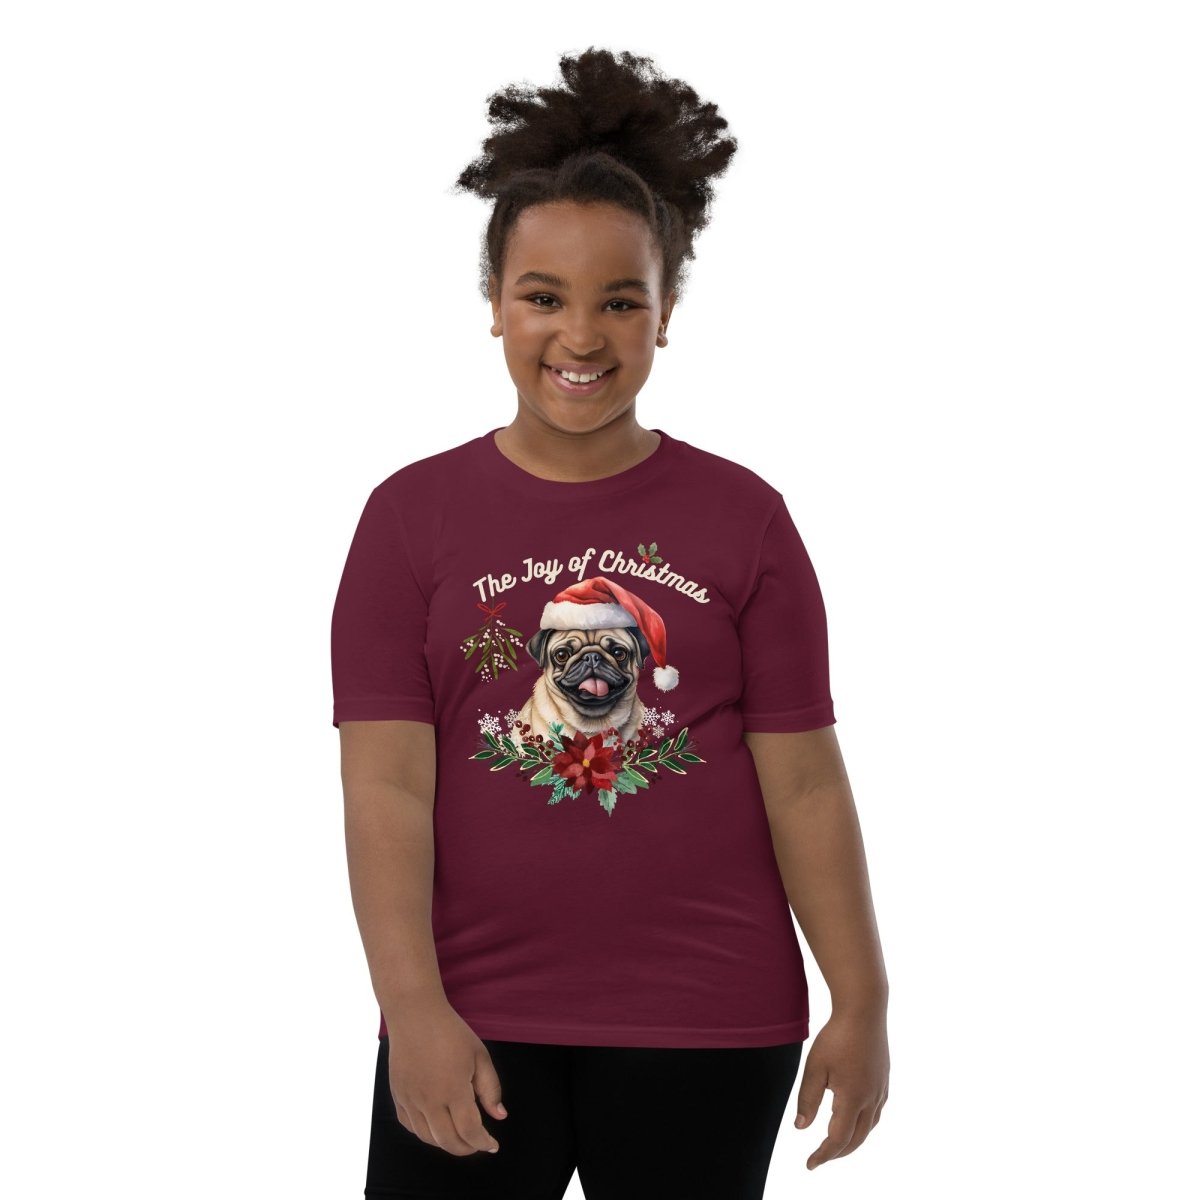 Christmas Pug T-Shirt - High Quality Festive Family Teenager T-Shirt, Gift for Her, Gift for Doglovers, Cute Xmas Dog Tee, Youth Xmas Tee - Everything Pixel